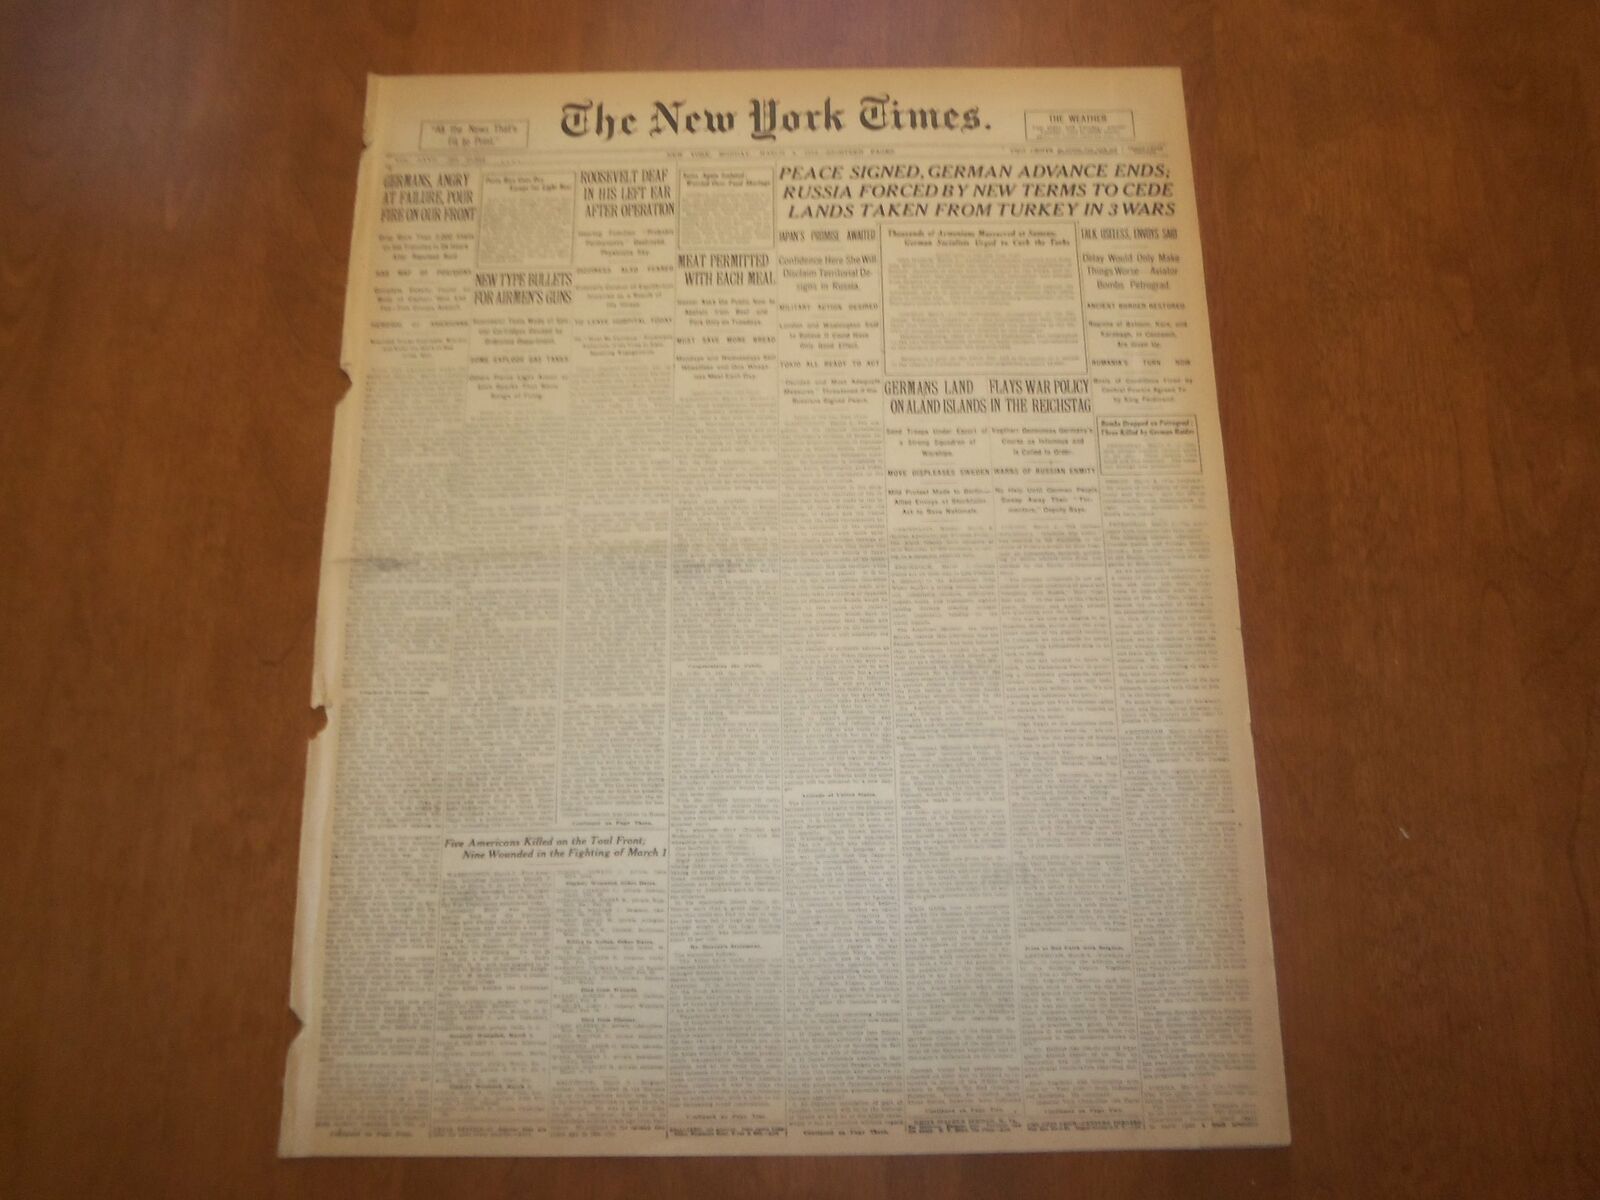 1918 MARCH 4 NEW YORK TIMES - PEACE SIGNED, GERMAN ADVANCE ENDS - NT 8141